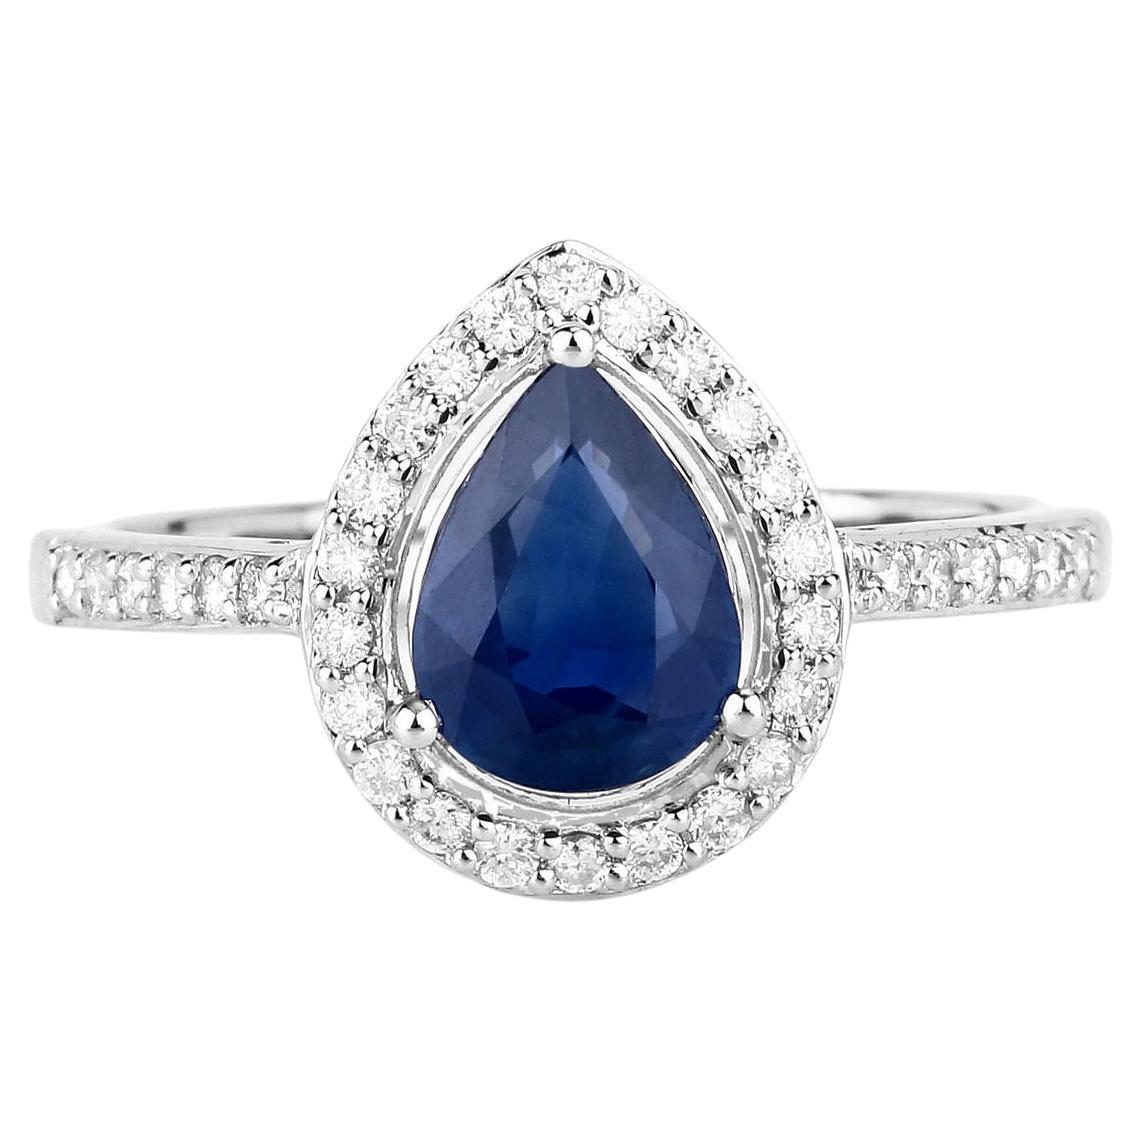 It comes with the appraisal by GIA GG/AJP
Sapphire = 1.50 Carat
Stone Size: 8 x 6 mm
Cut: Pear
Diamonds = 0.30 Carats
( Color: J, Clarity: SI )
Metal: 14K White Gold
Height: 5 mm
Width: 20 mm
Length: 12 mm
Ring Size: 7* US
*It can be resized